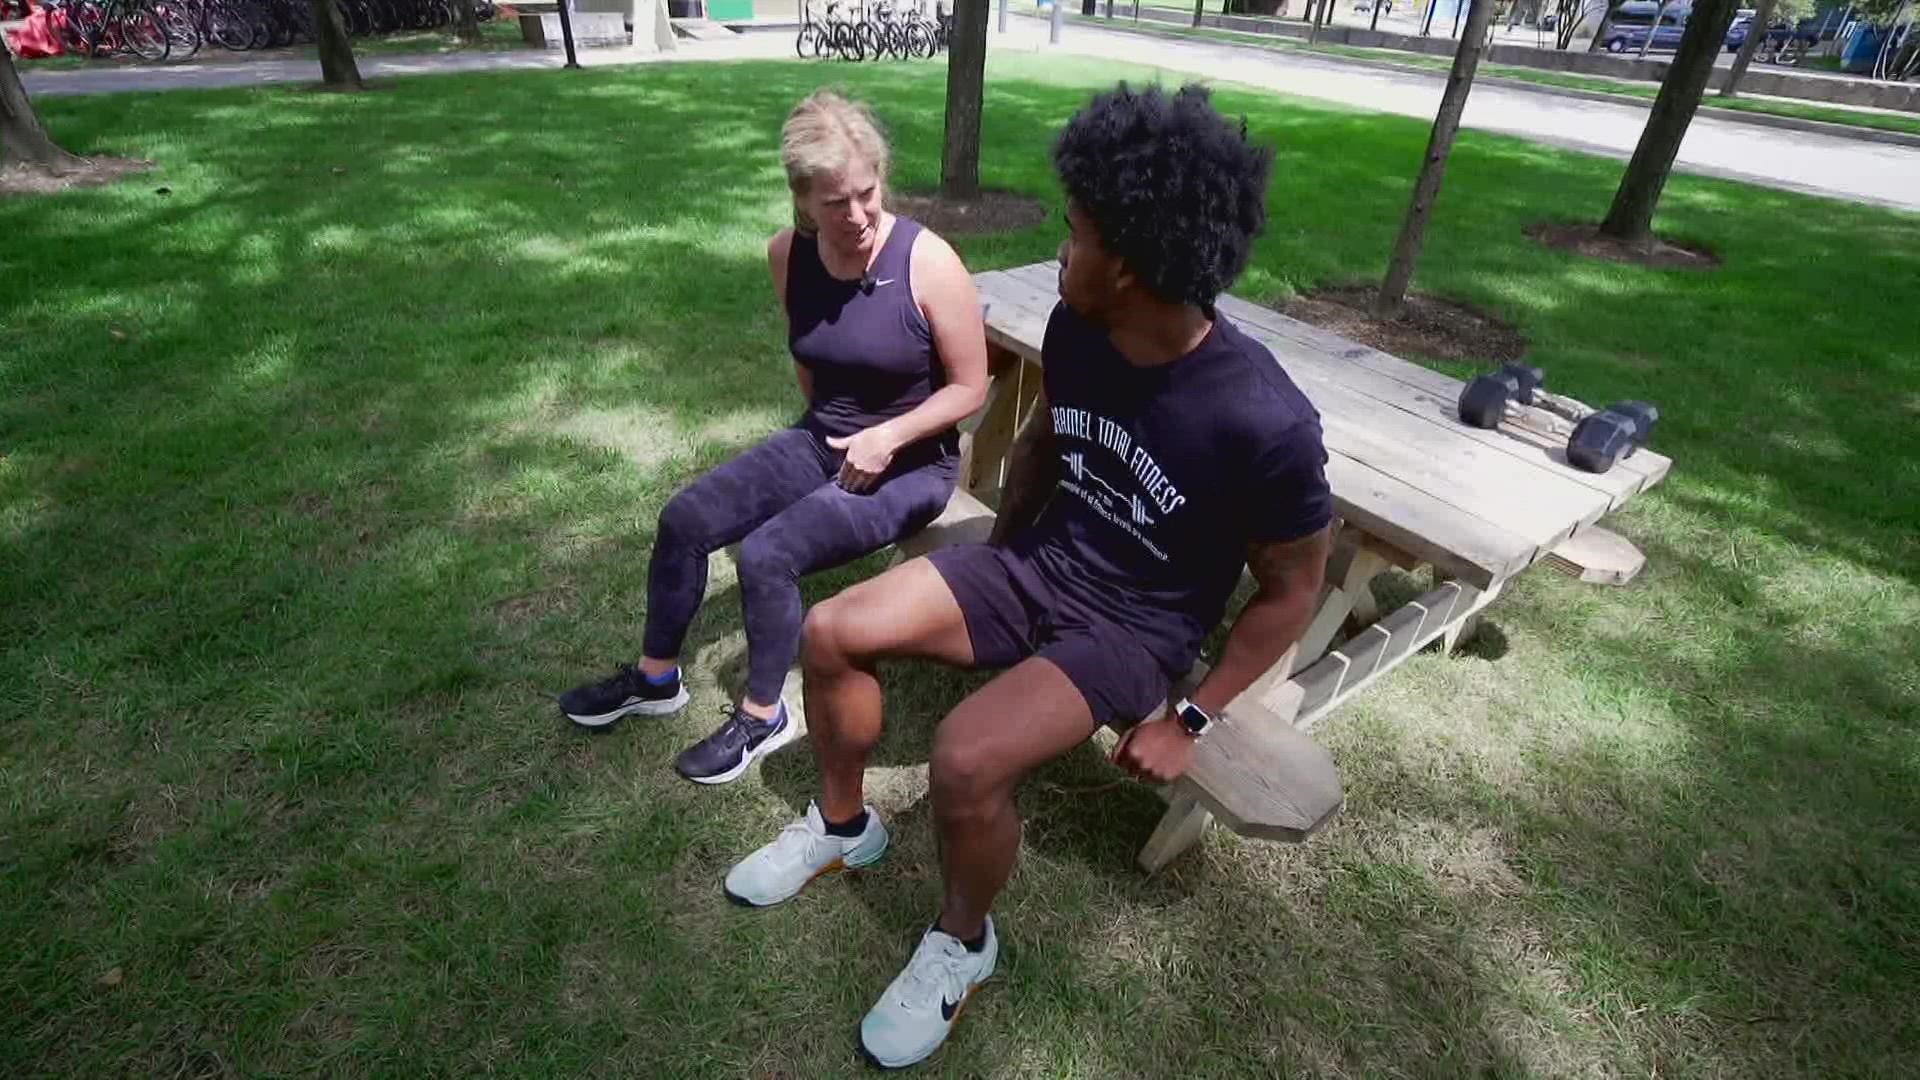 Fitness expert Ron Allen says there's opportunities to work out wherever you are, including at a picnic bench.